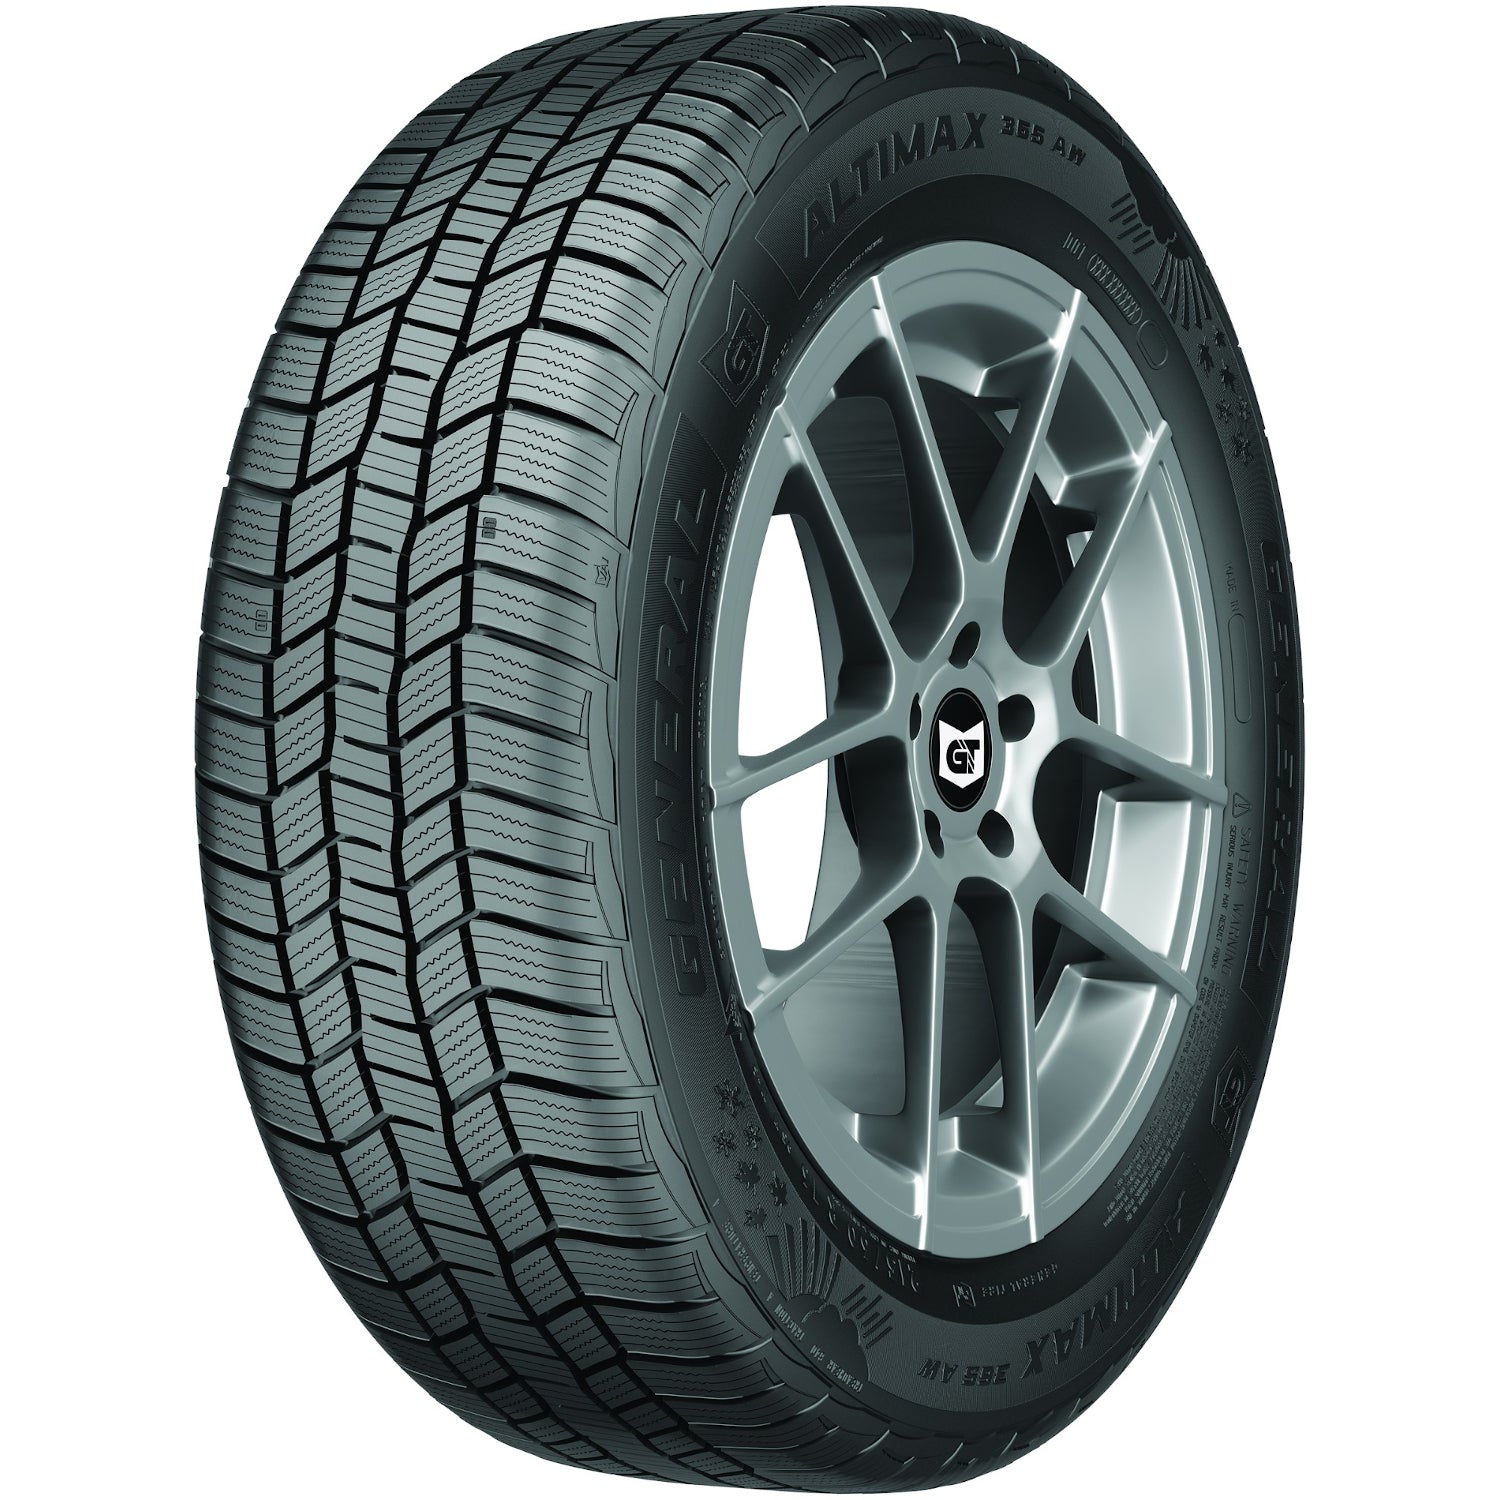 GENERAL ALTIMAX 365AW 245/55R19 (29.6X9.7R 19) Tires